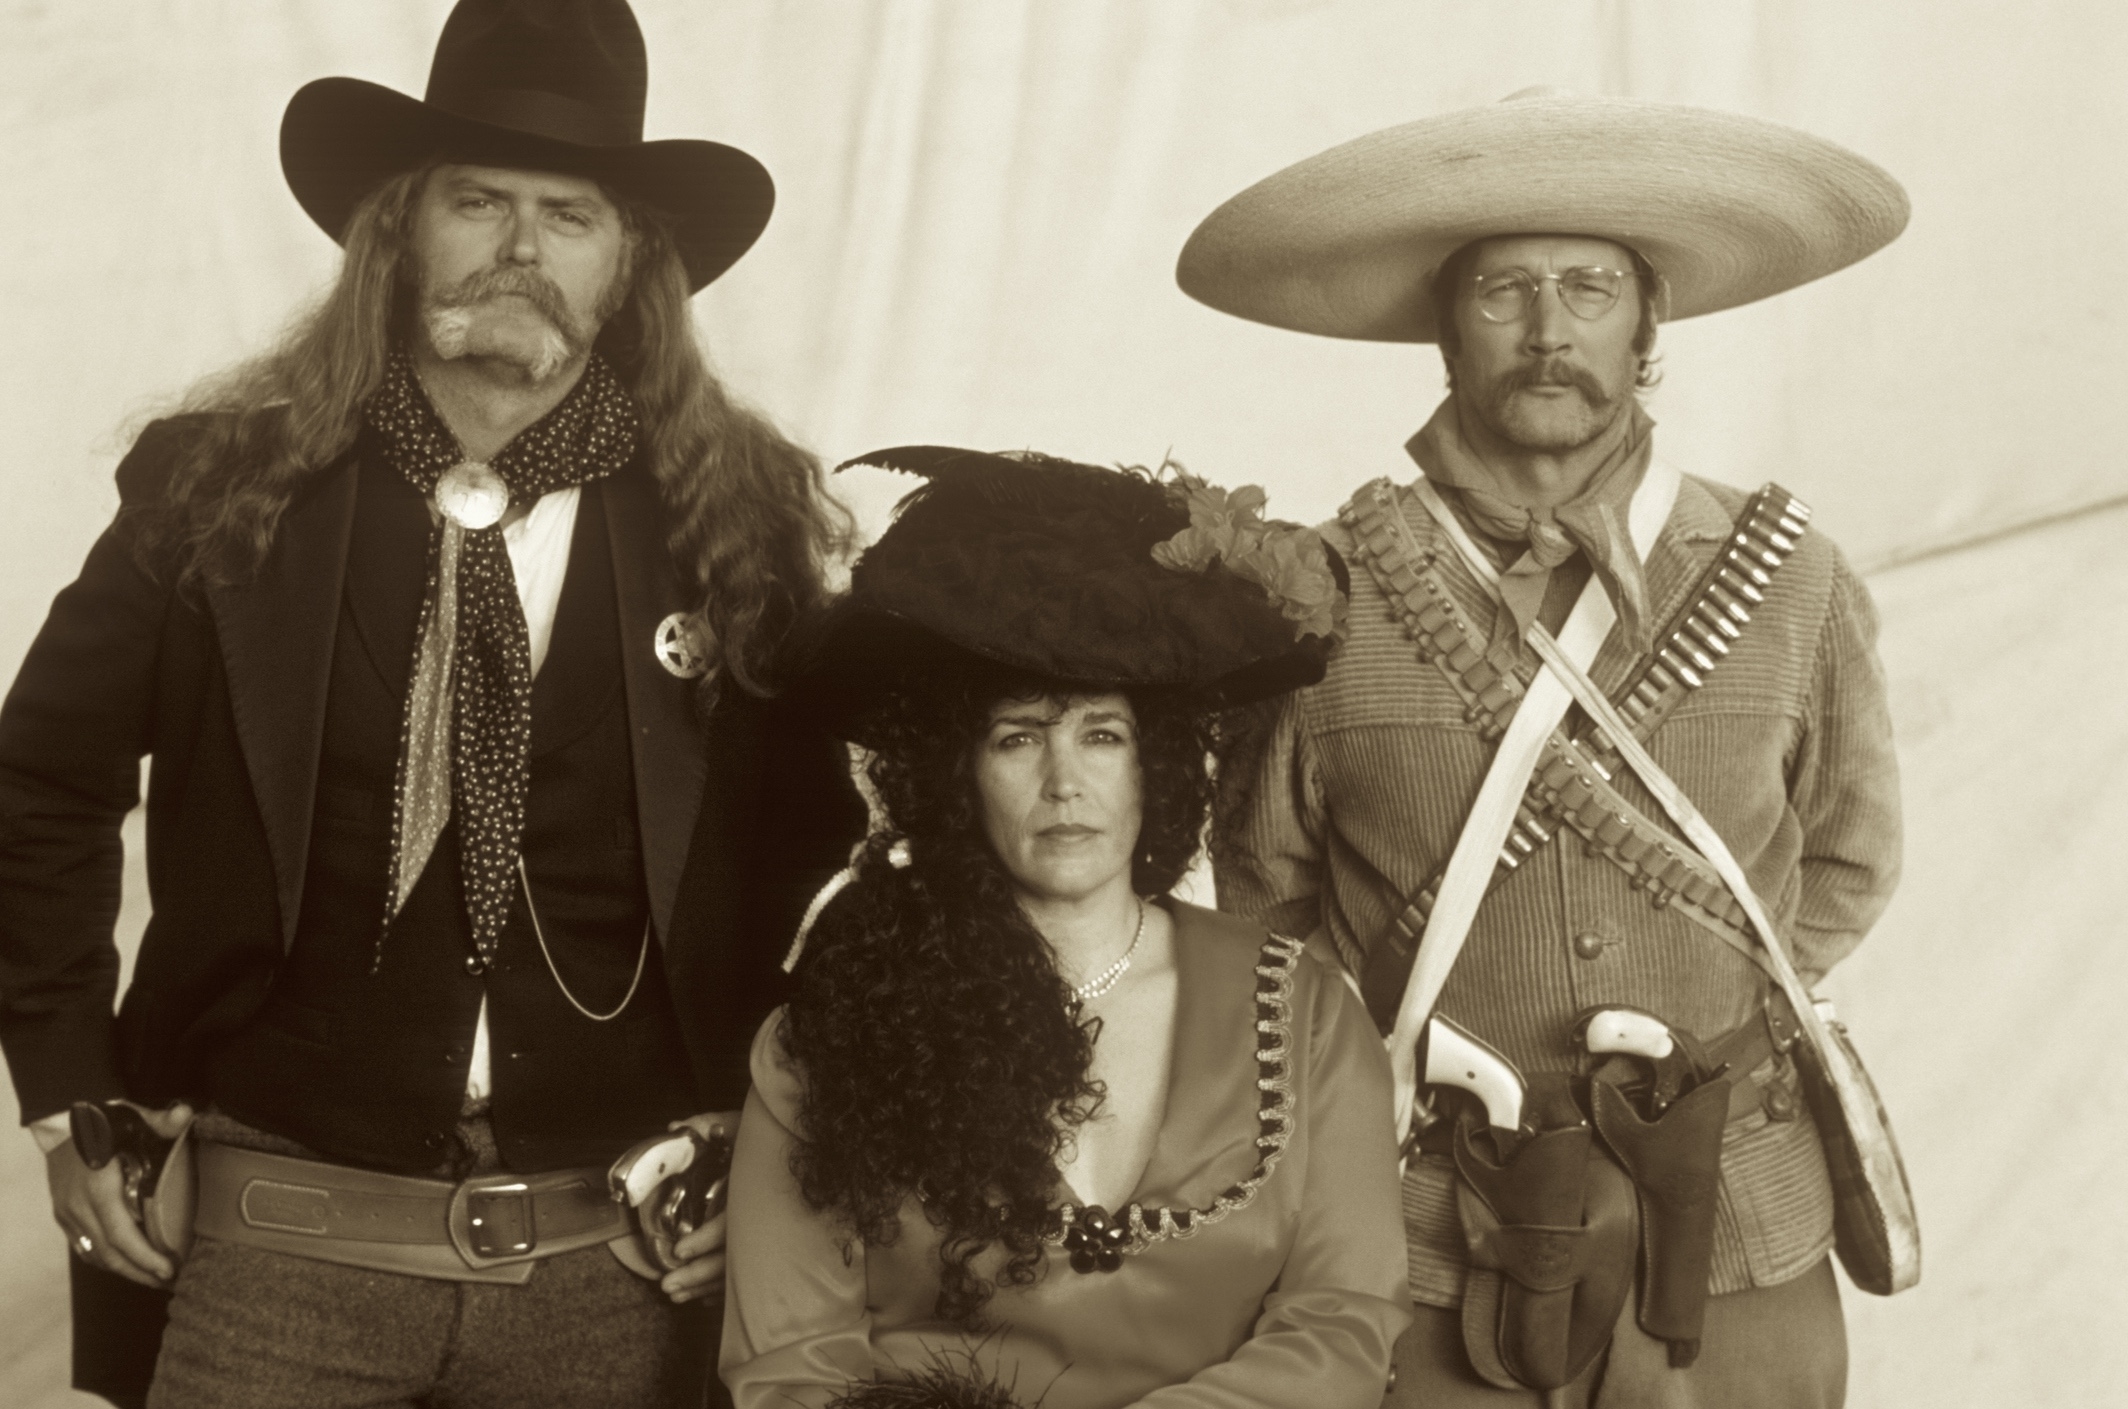 Three individuals in period Western attire are posing; two men with mustaches wearing wide-brimmed hats and gun belts, and a woman with curly hair in a dress and feathered hat